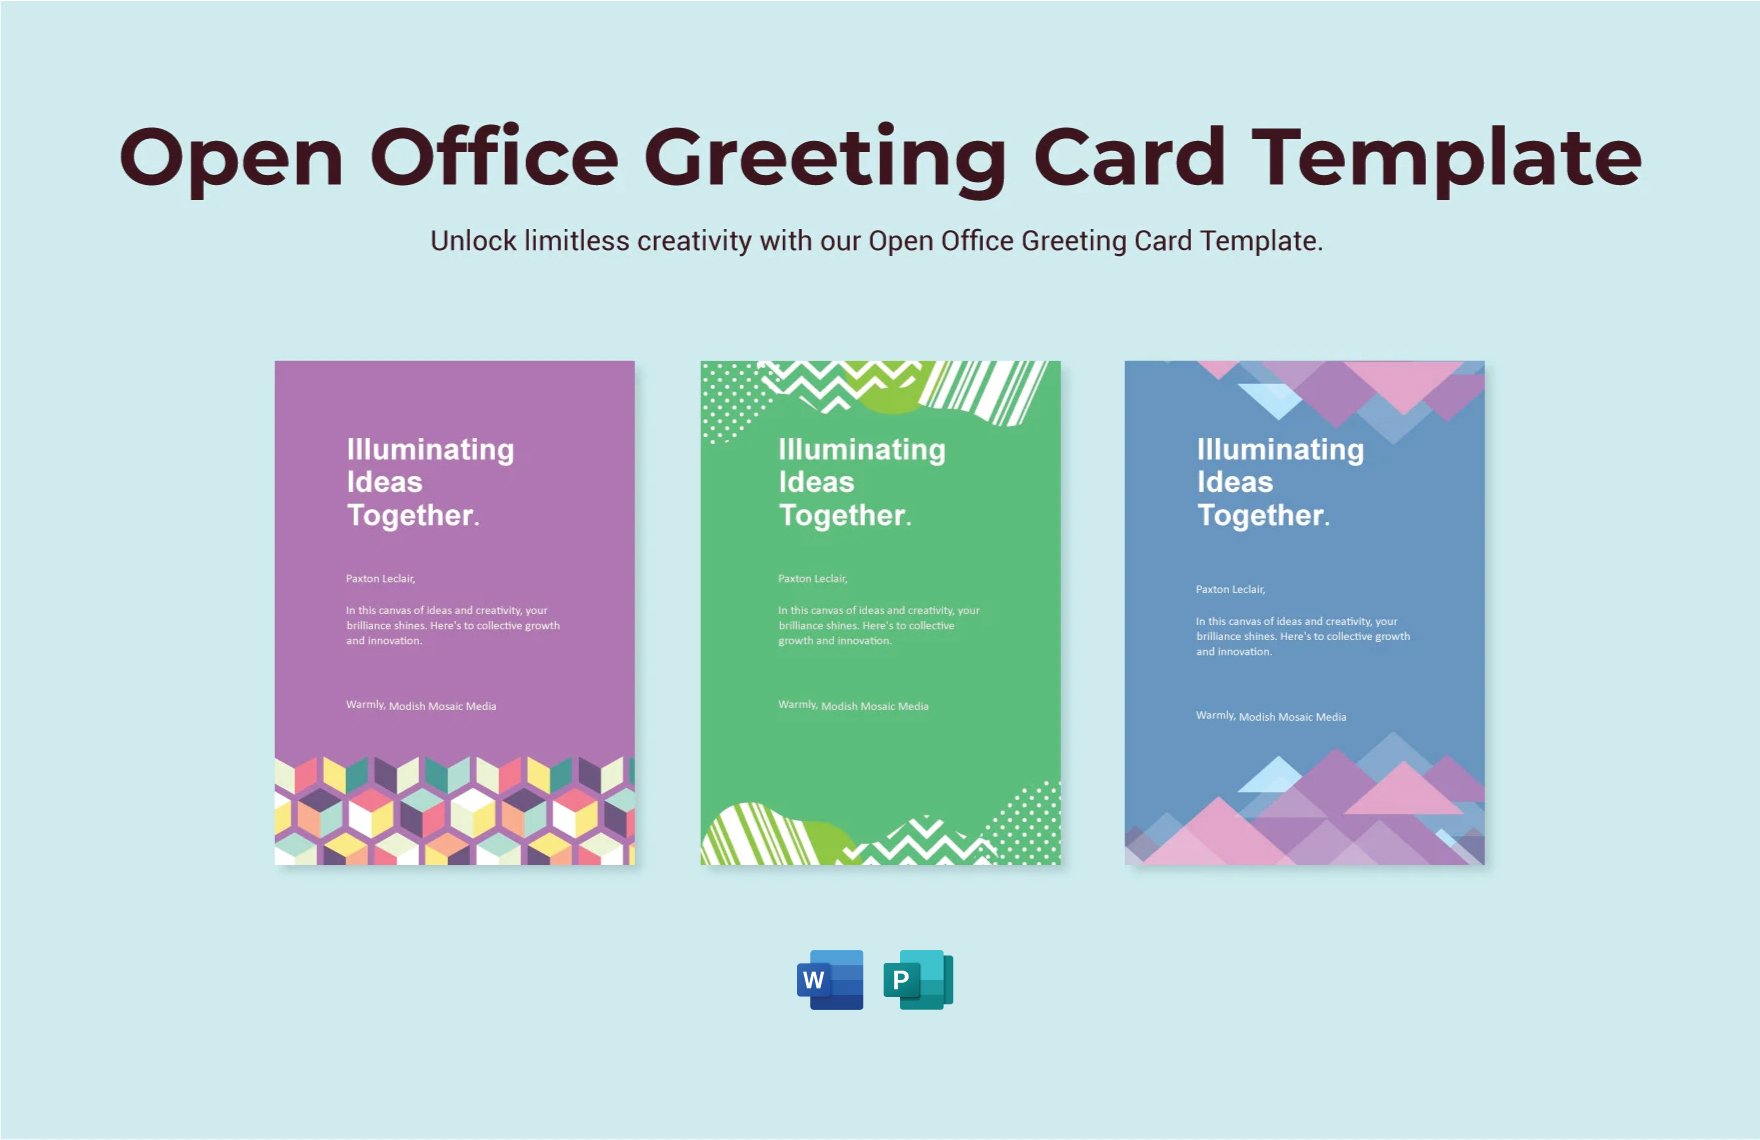 Open Office Greeting Card Template